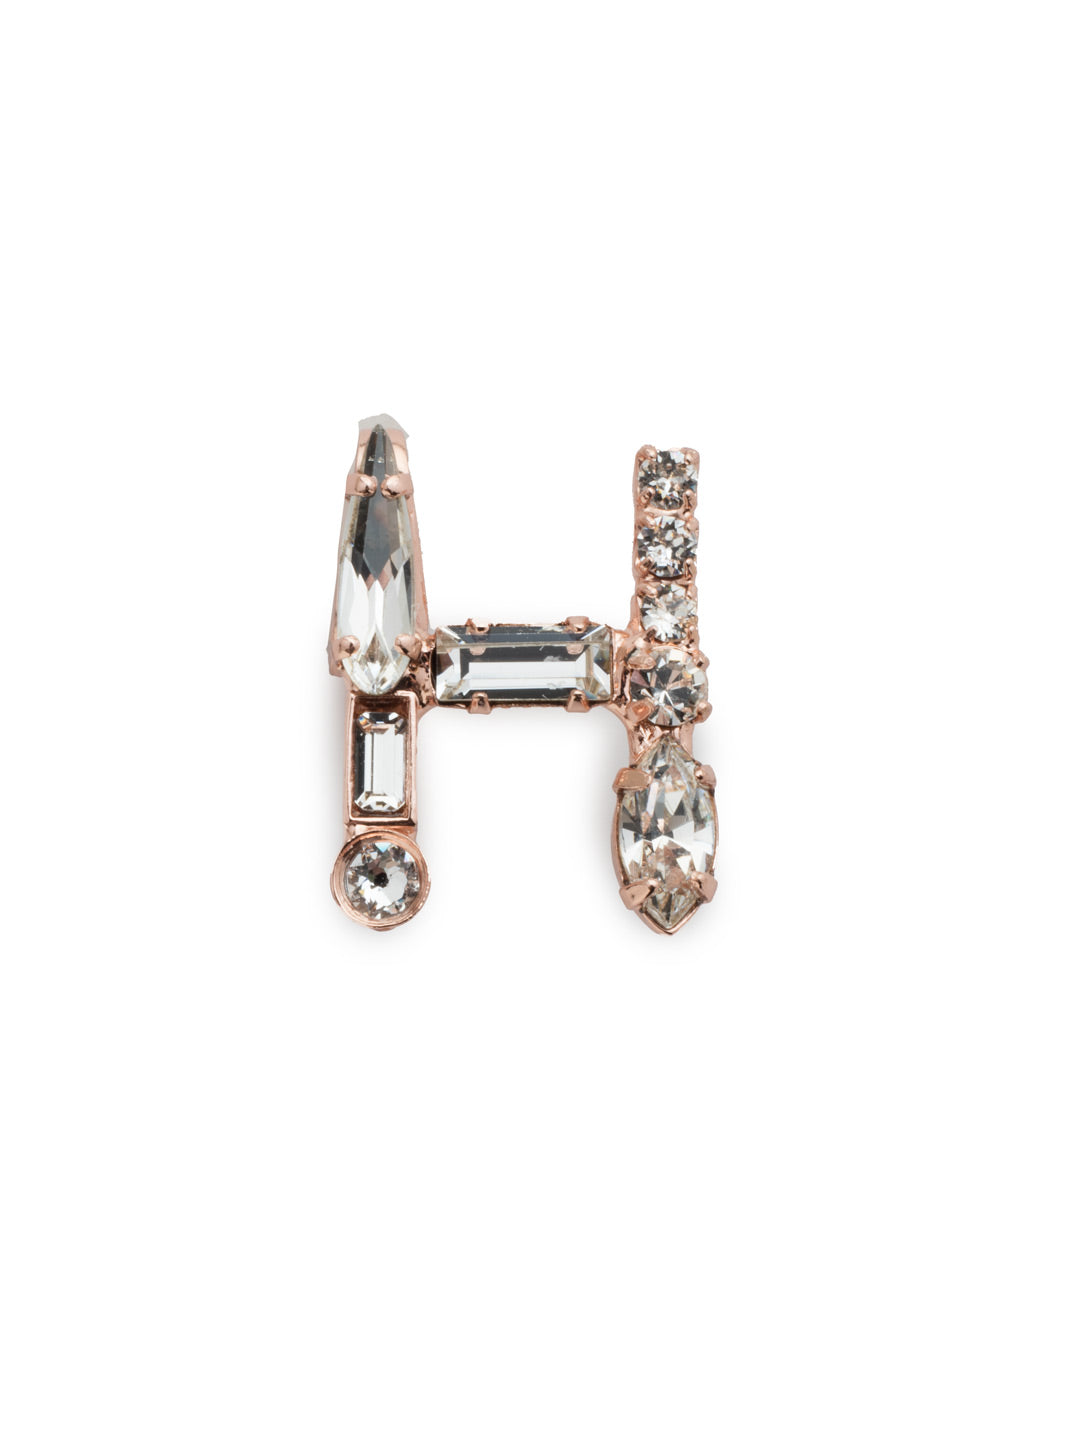 Crystal Charm 'H' Charm Other Accessory - CES15RGCRY